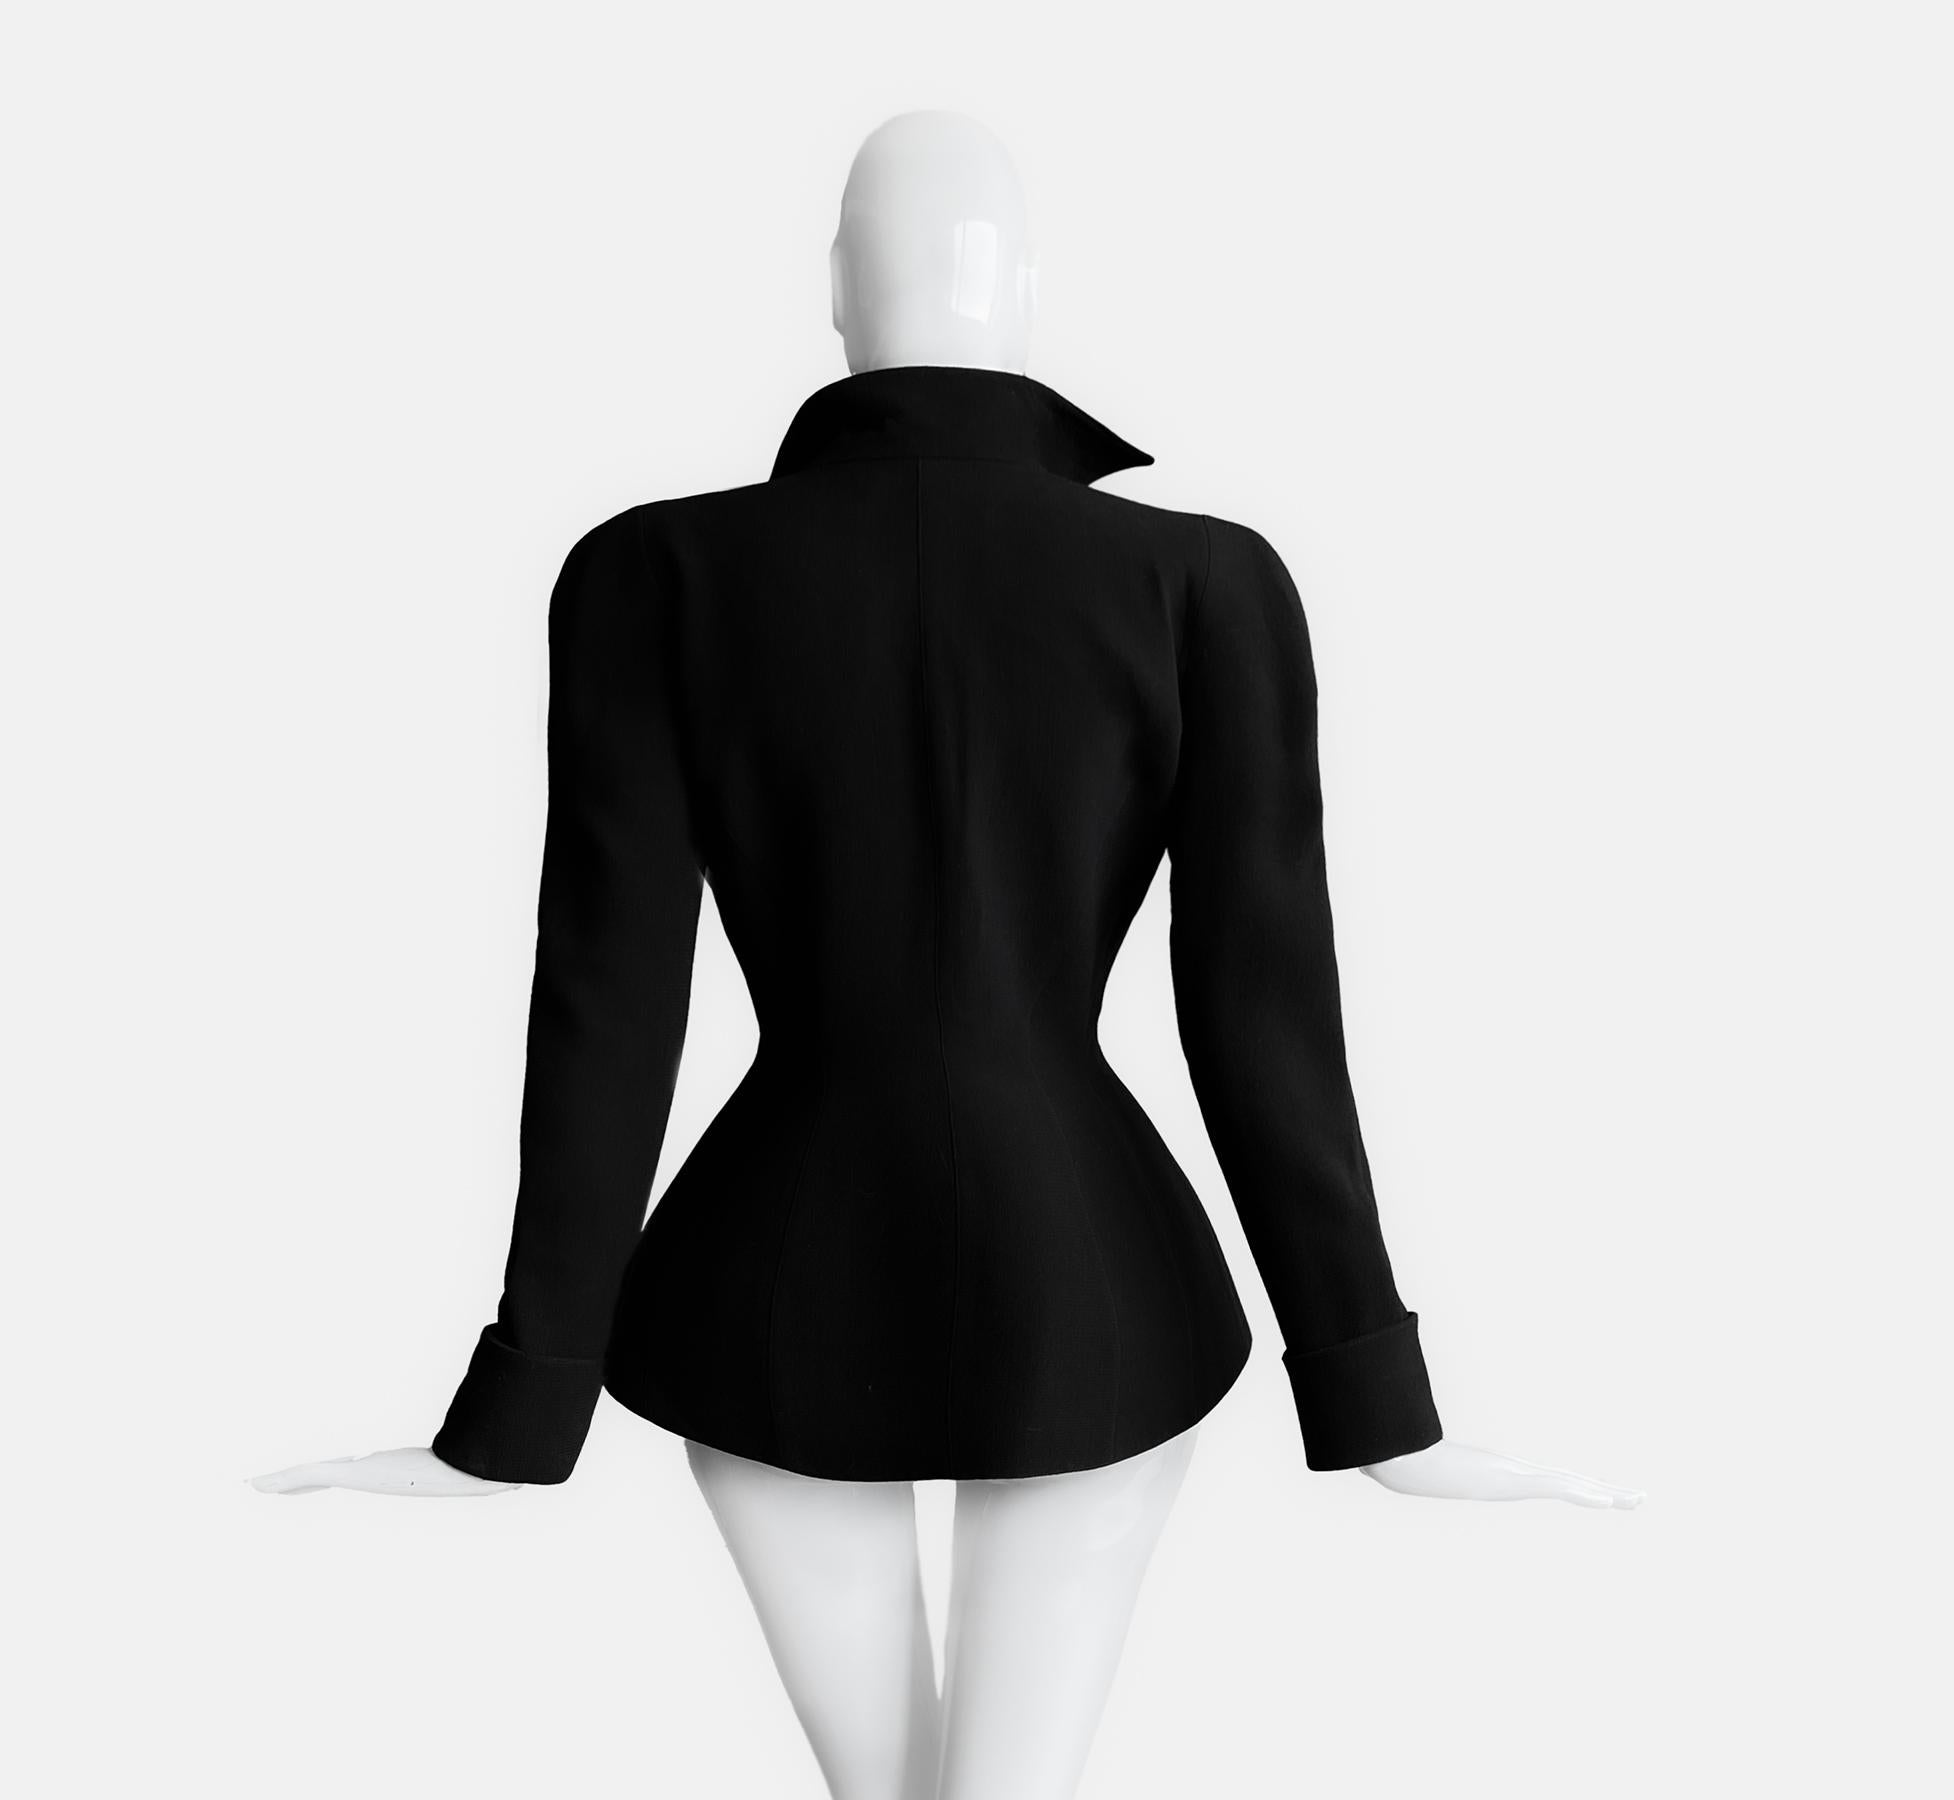 Thrilling Thierry Mugler LES INFERNALES FW1988/89 Black Dramatic ZigZag Jacket For Sale 5